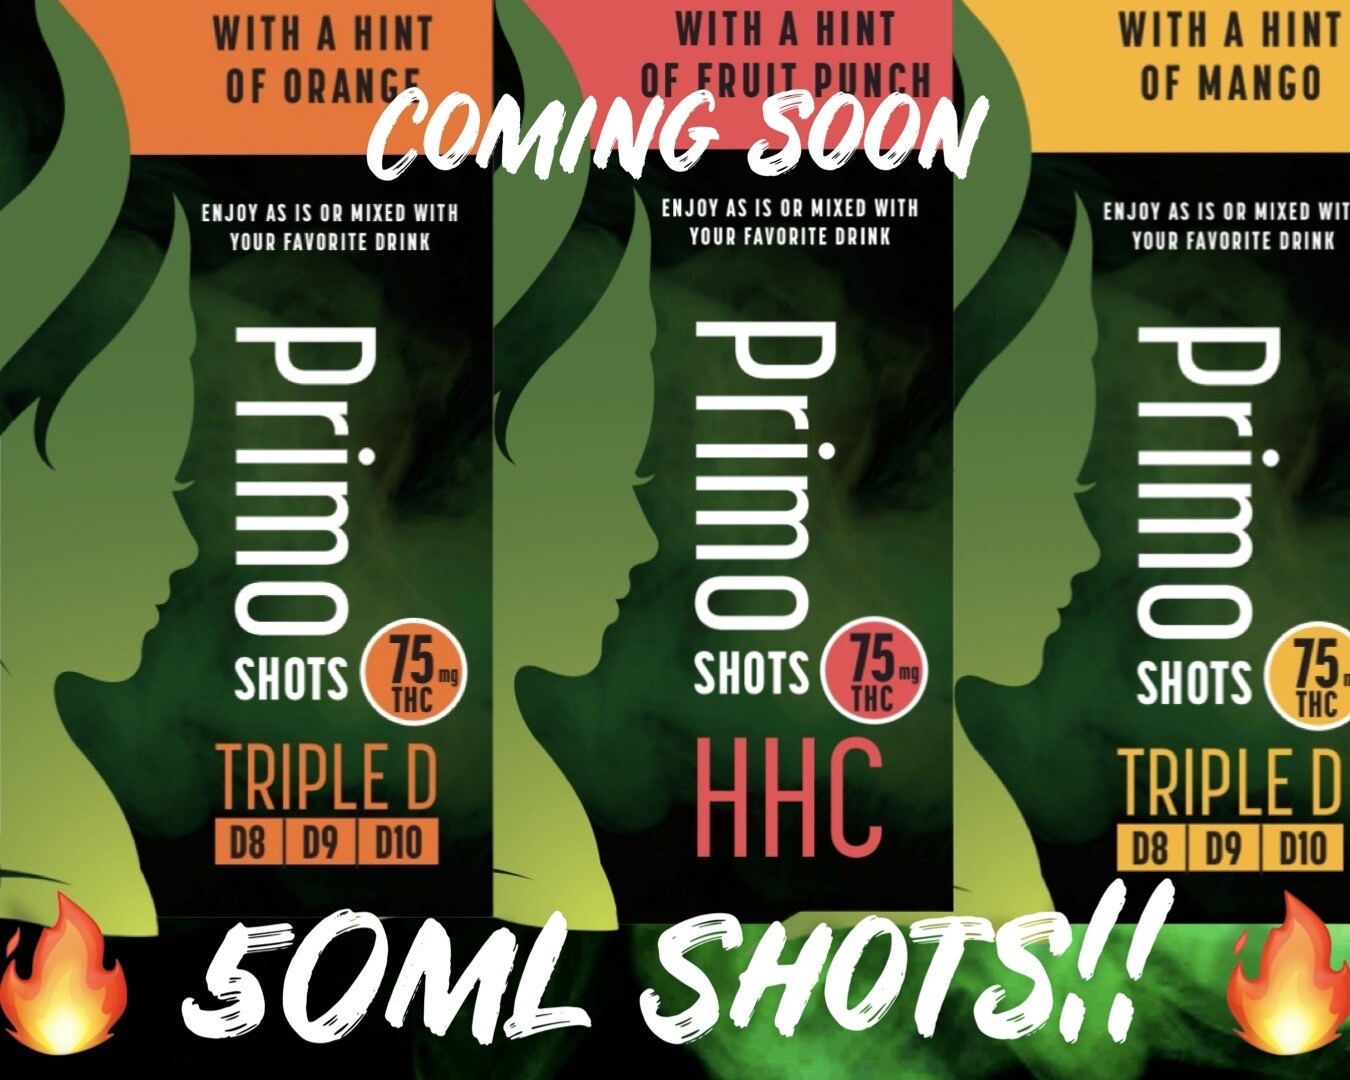 Triple-D Primo Shot with a hint of Mango! (Hemp Derivative THC Infused 50ml Shots)